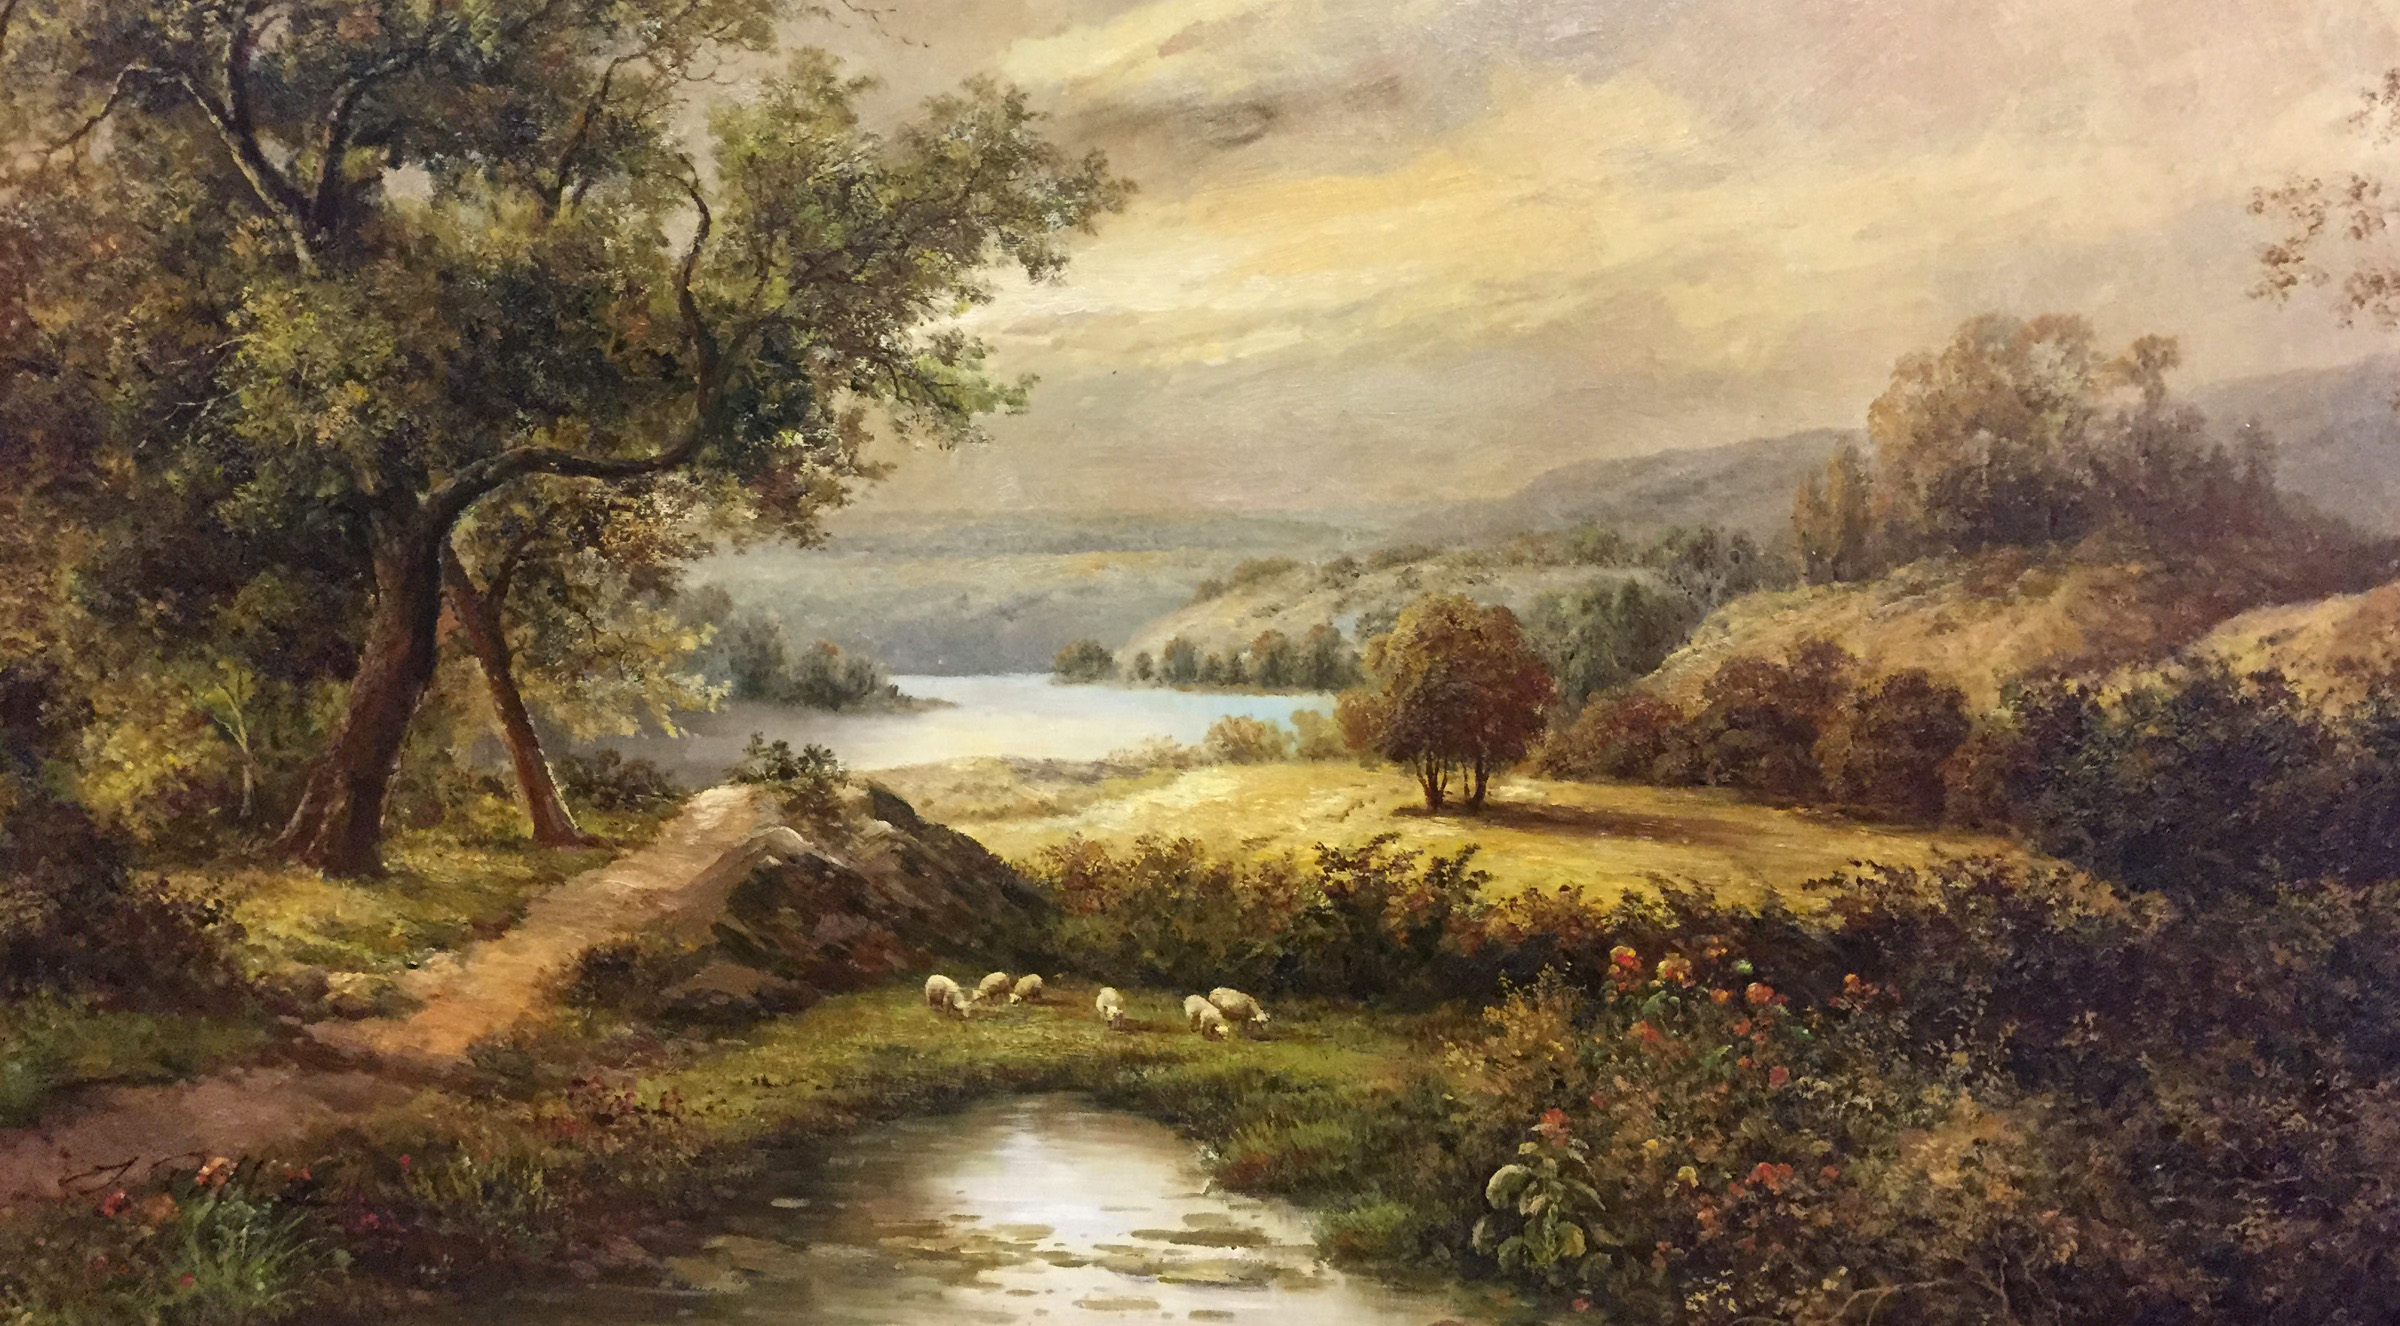 Painting of people on horses with a pack of beagles probably fox hunting. This is meant to illustrate the firm's history with notable donors in the region who have given generously over the generations.